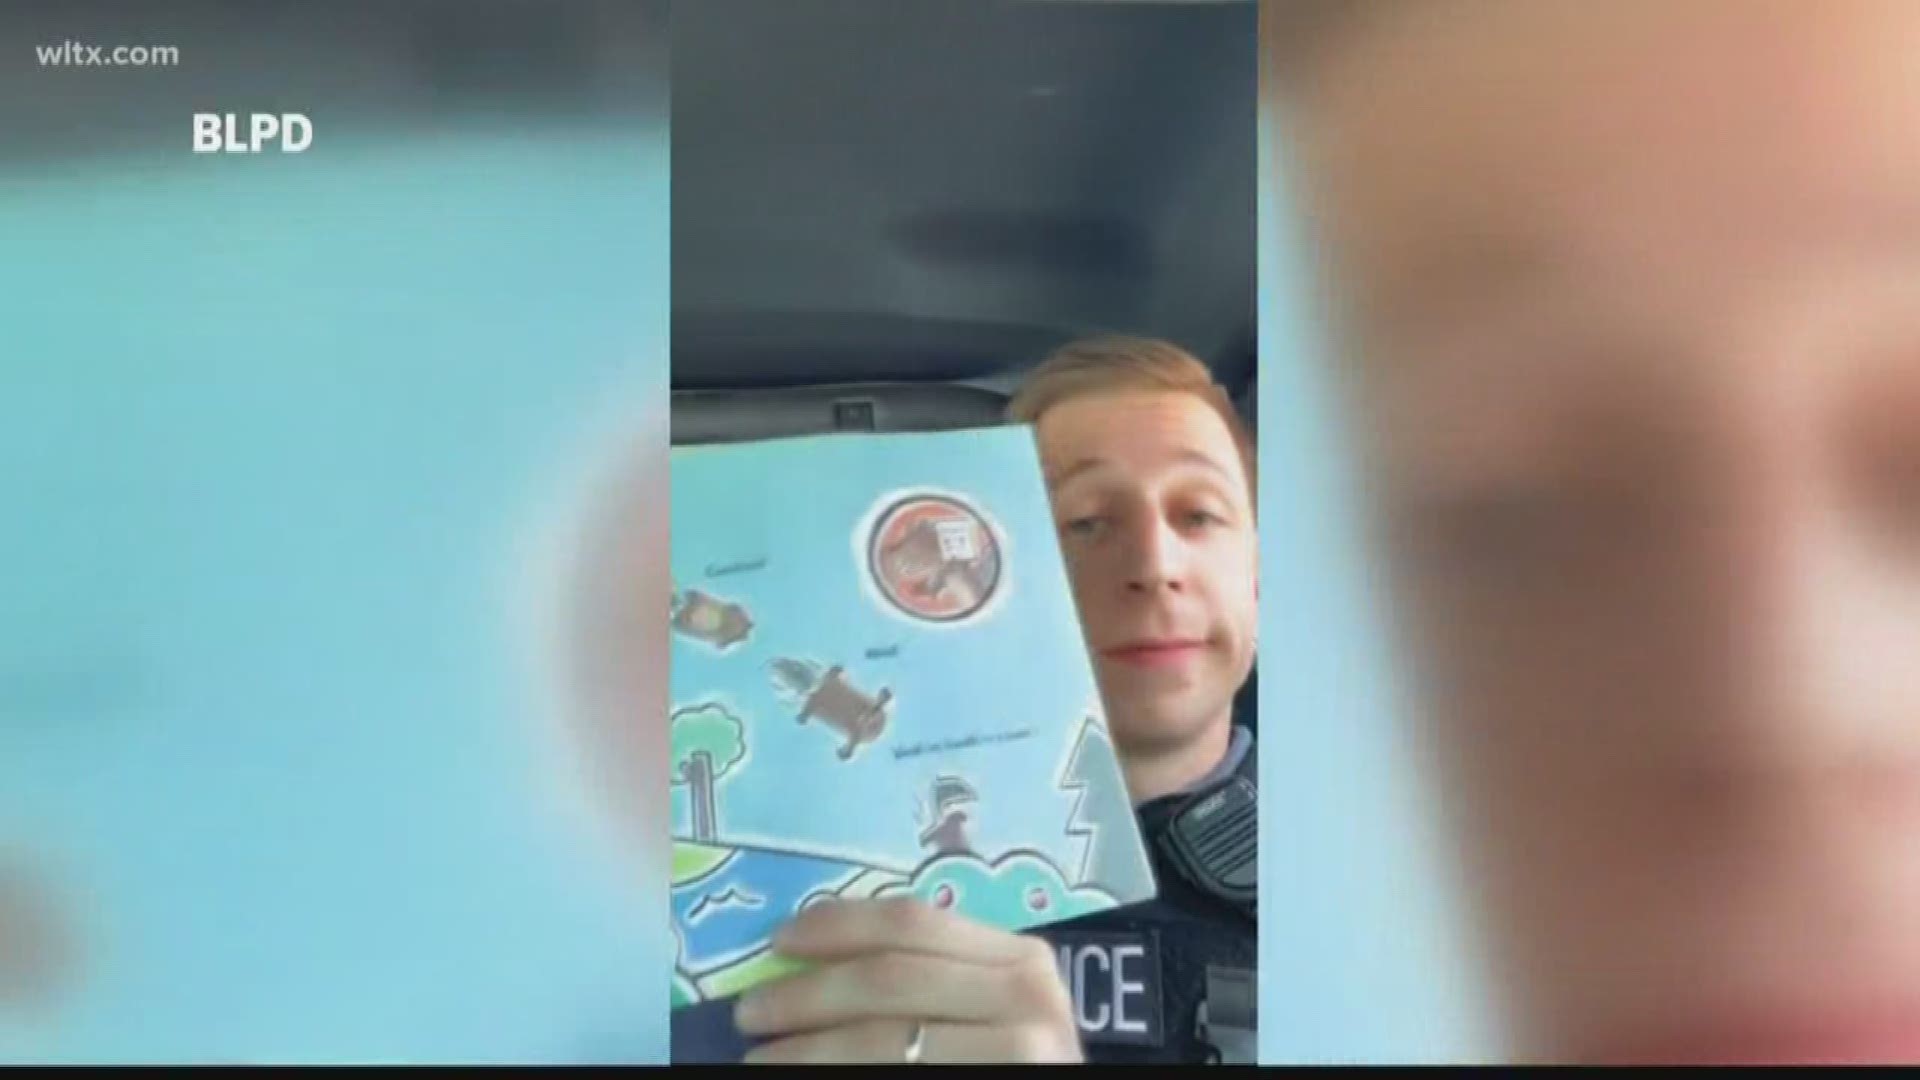 Since school has been out because of the coronavirus, officers are staying connected with kids by reading to them through their department's Facebook page.